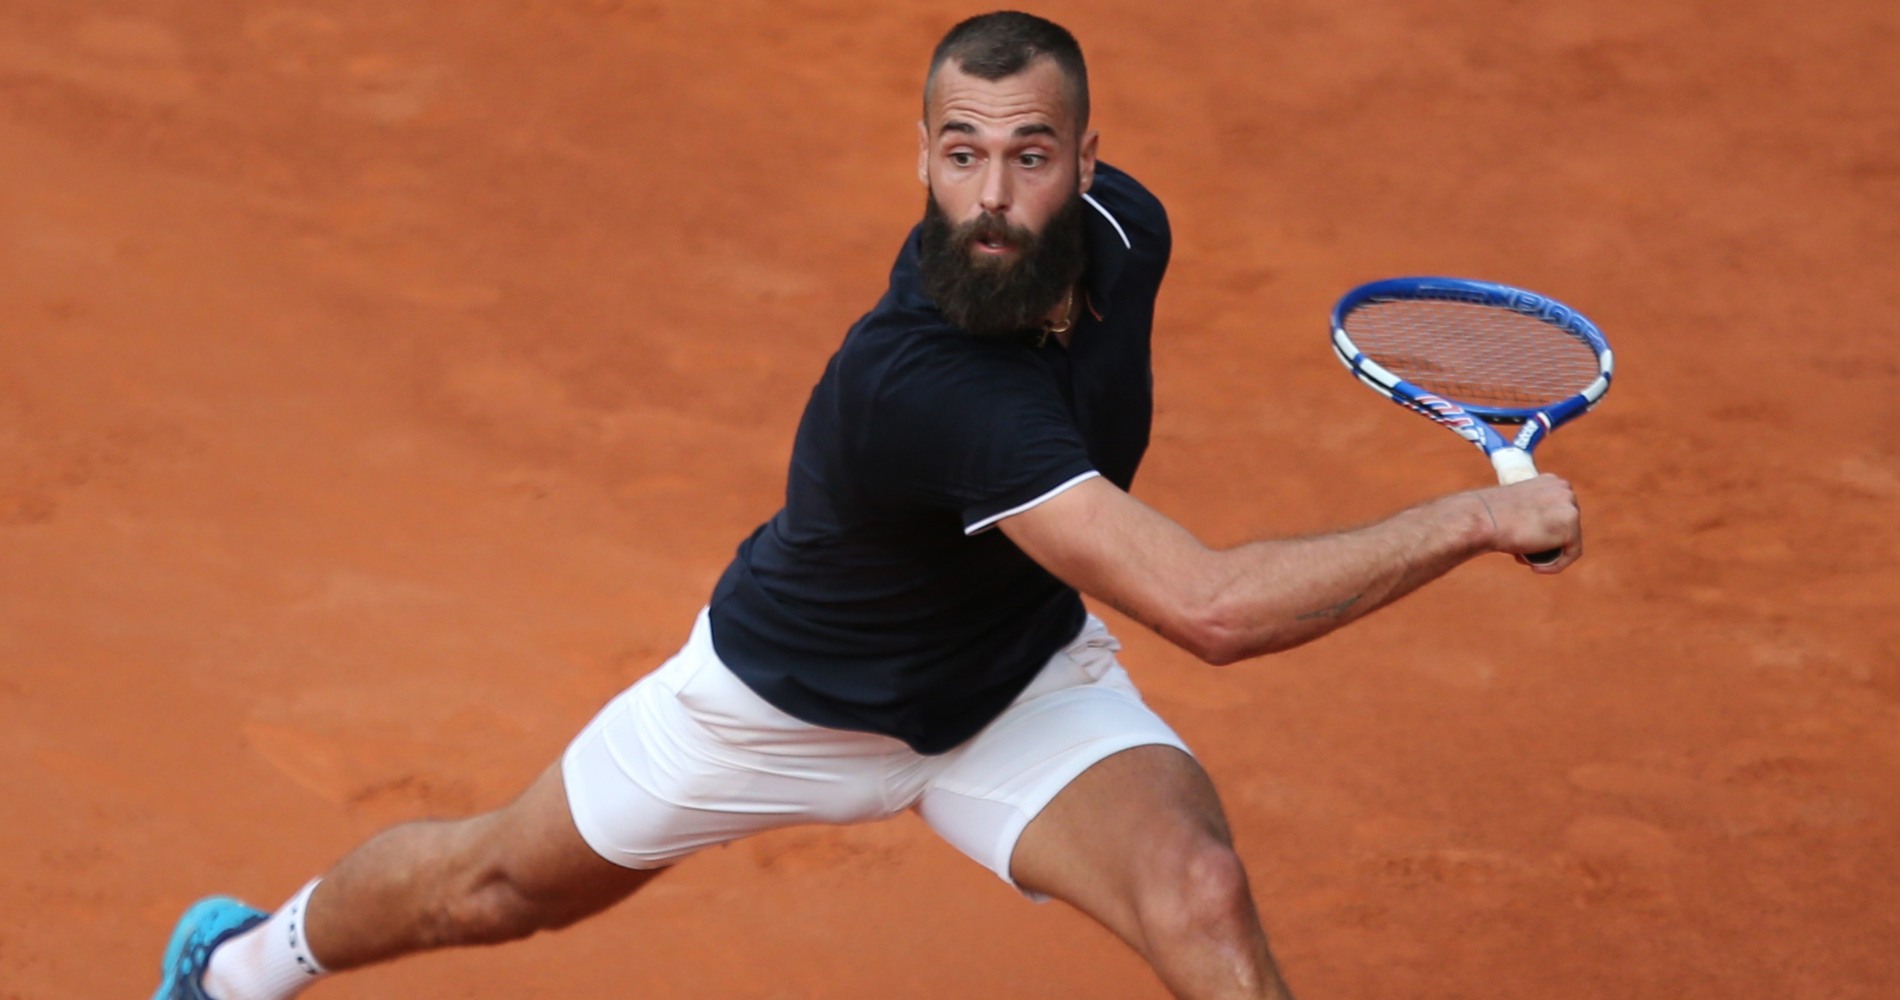 Wimbledon Tennis 2021 You Re Wasting Everybody S Time Benoit Paire Hit With Code Violation Over Lack Of Effort Eurosport [ 675 x 1200 Pixel ]